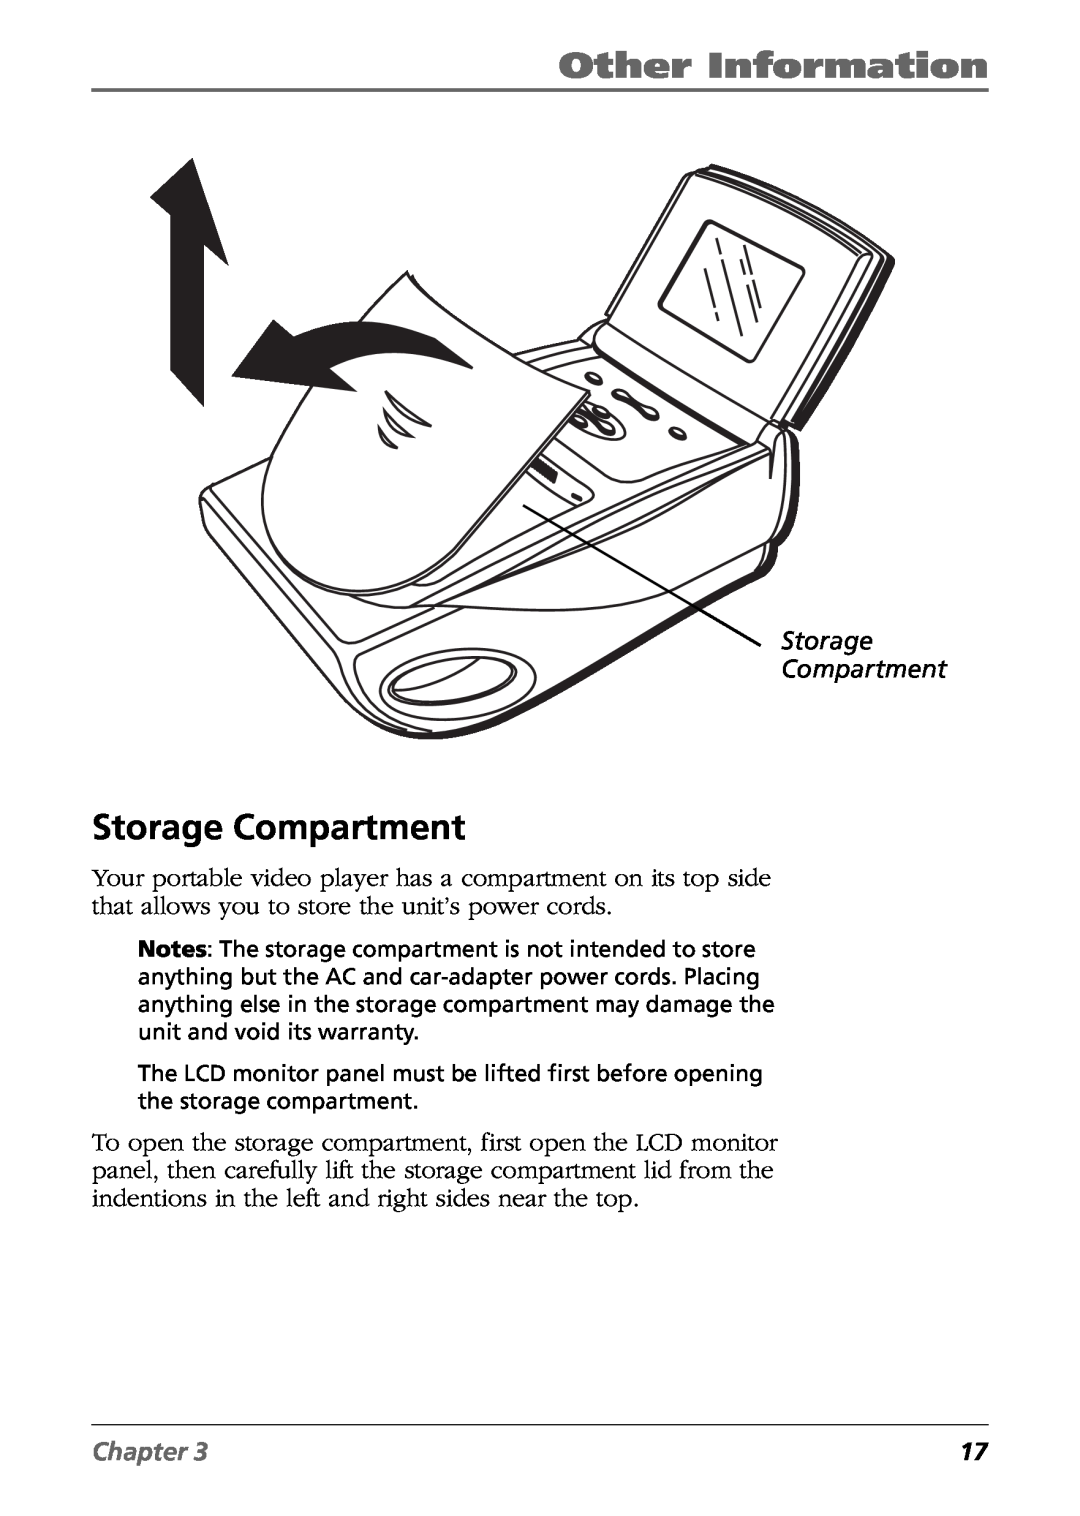 RCA Mobile Video Cassette Player manual Storage Compartment, Other Information, Chapter 